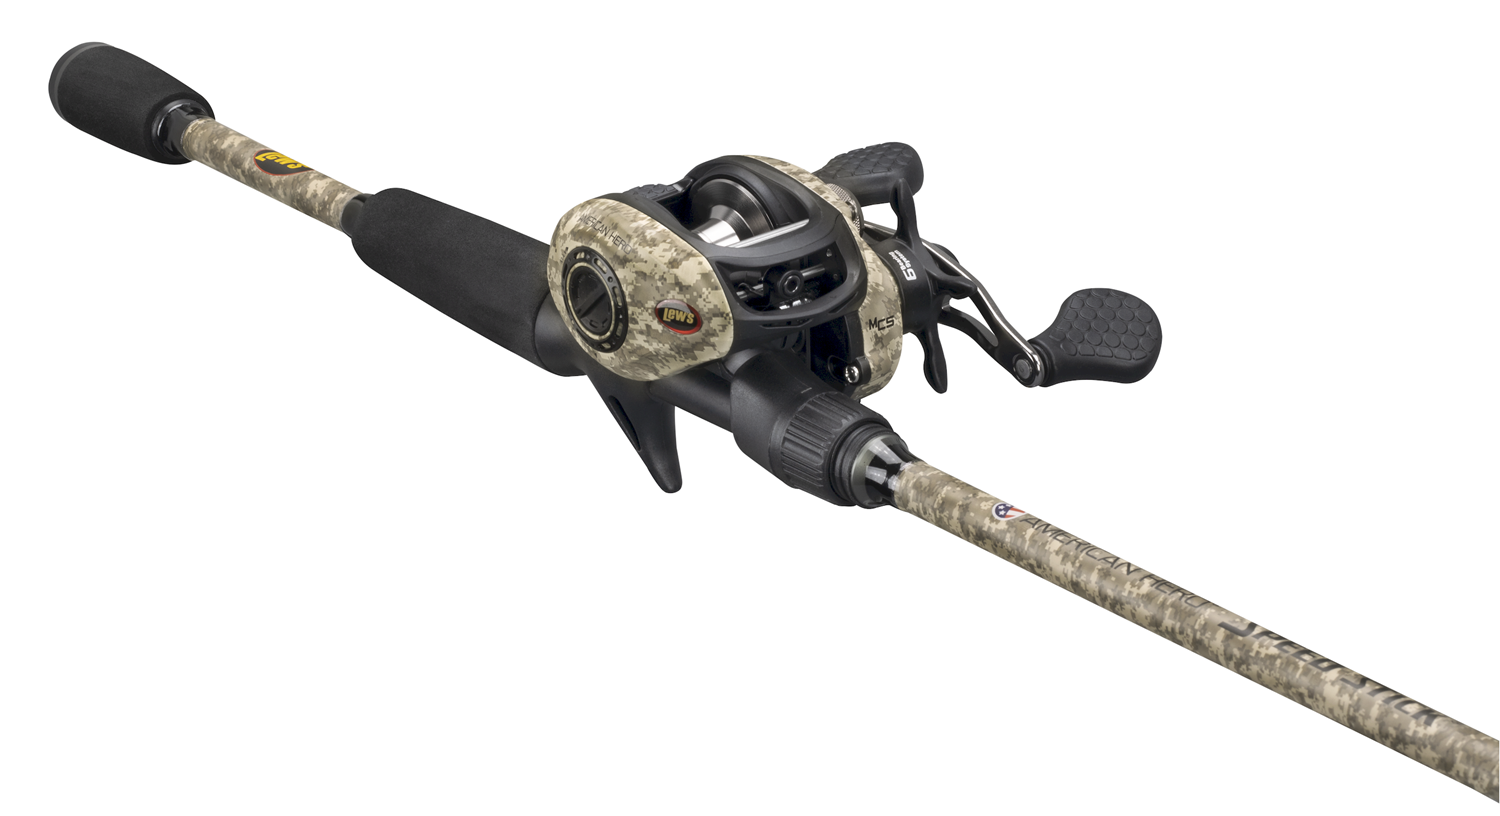 Lew's American Hero Camo Spd Spl IM7 Combo AHC1SHL610MH , $6.10 Off with  Free S&H — CampSaver